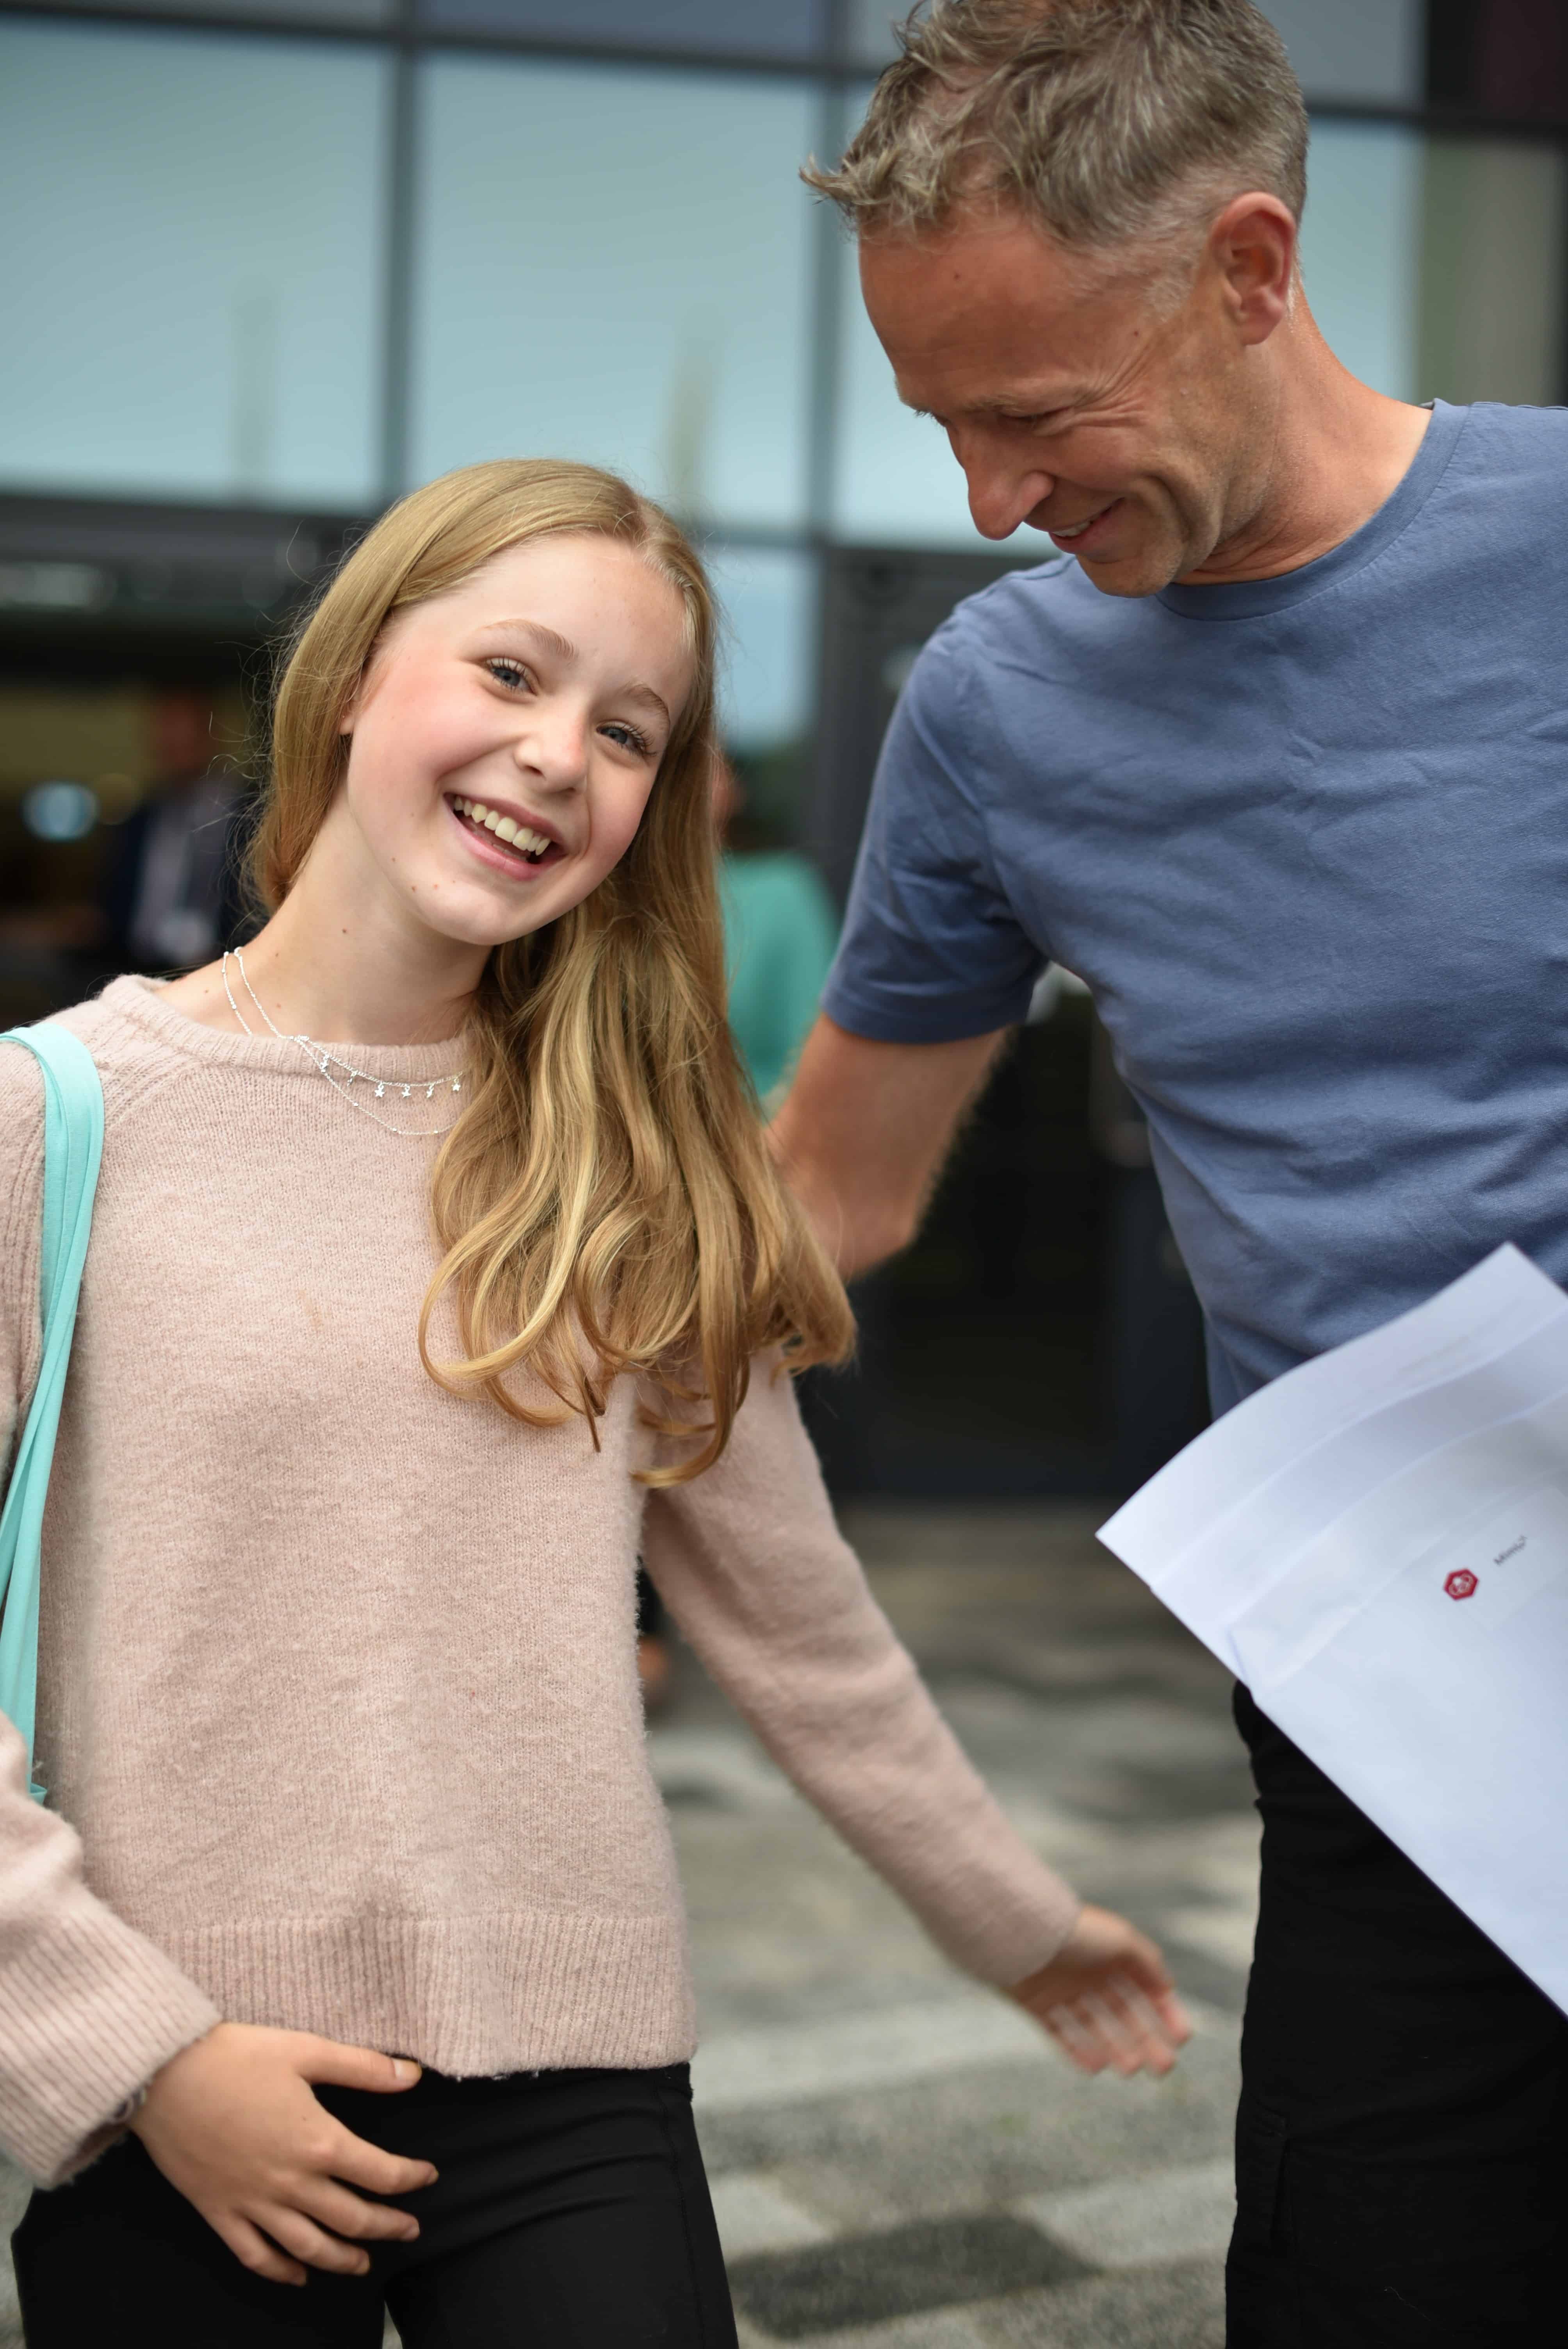 A Didsbury High School student smiles with a proud family member after finding out her GCSE results.